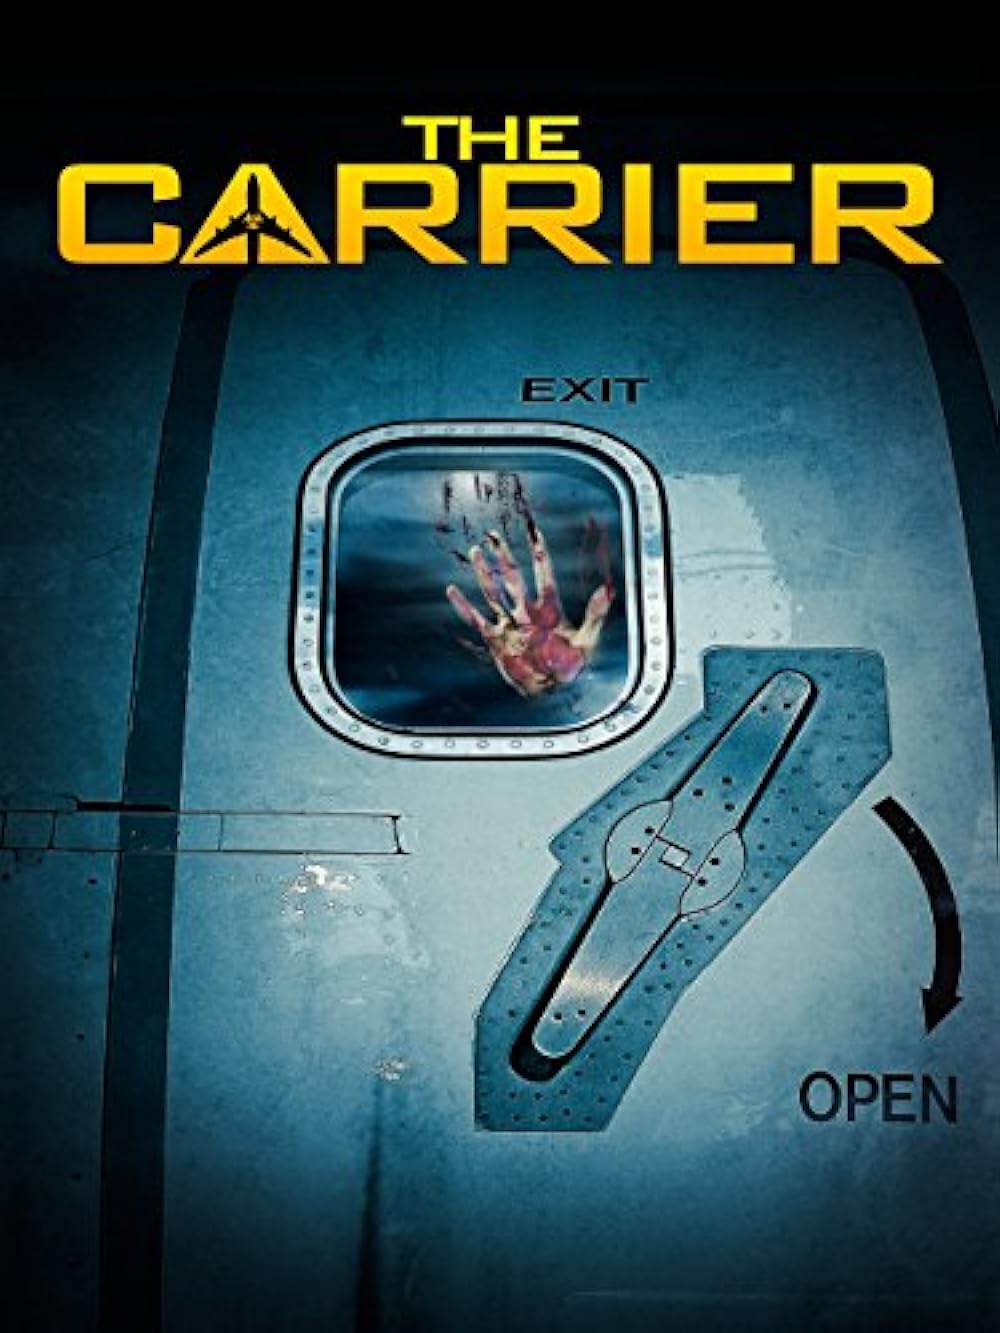 TheCarrier